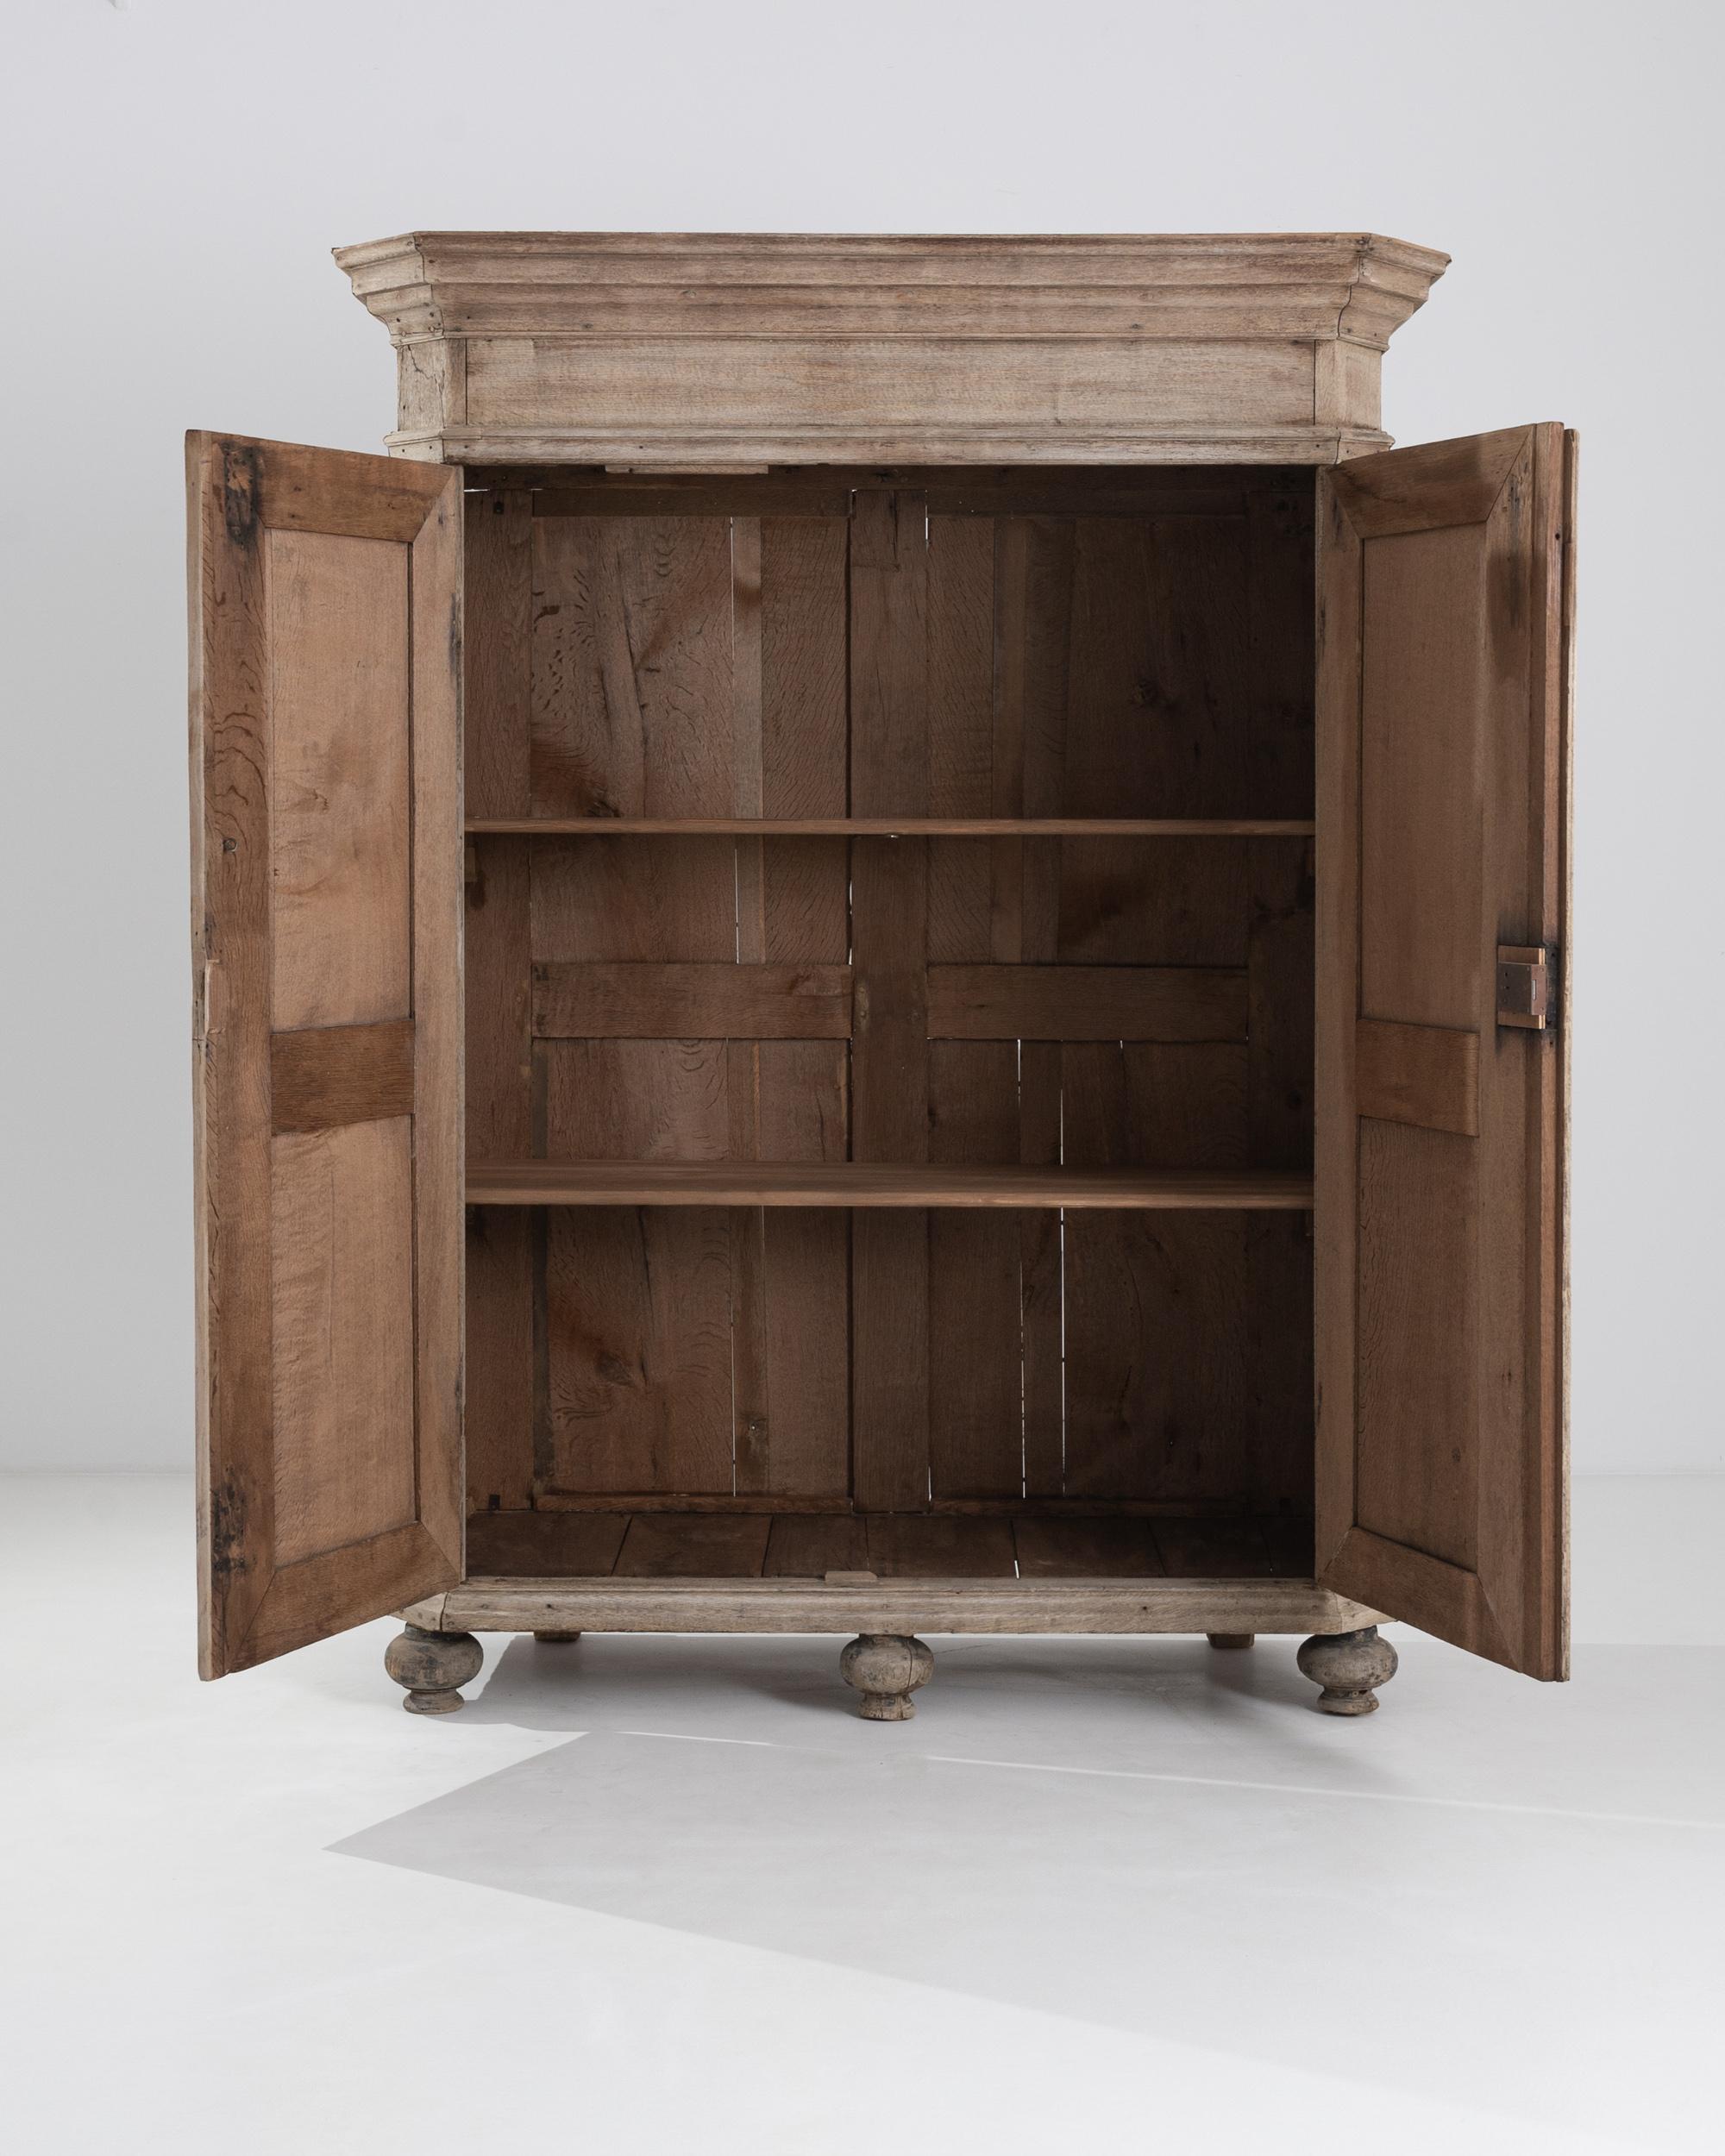 A vintage wooden armoire from France. This large cabinet opens its doors to reveal three sumptuous storage shelves. Artfully paneled doors and bulbous lathed feet engender a rustic sense of ease in this armoire. A delicate bleached oak finish and